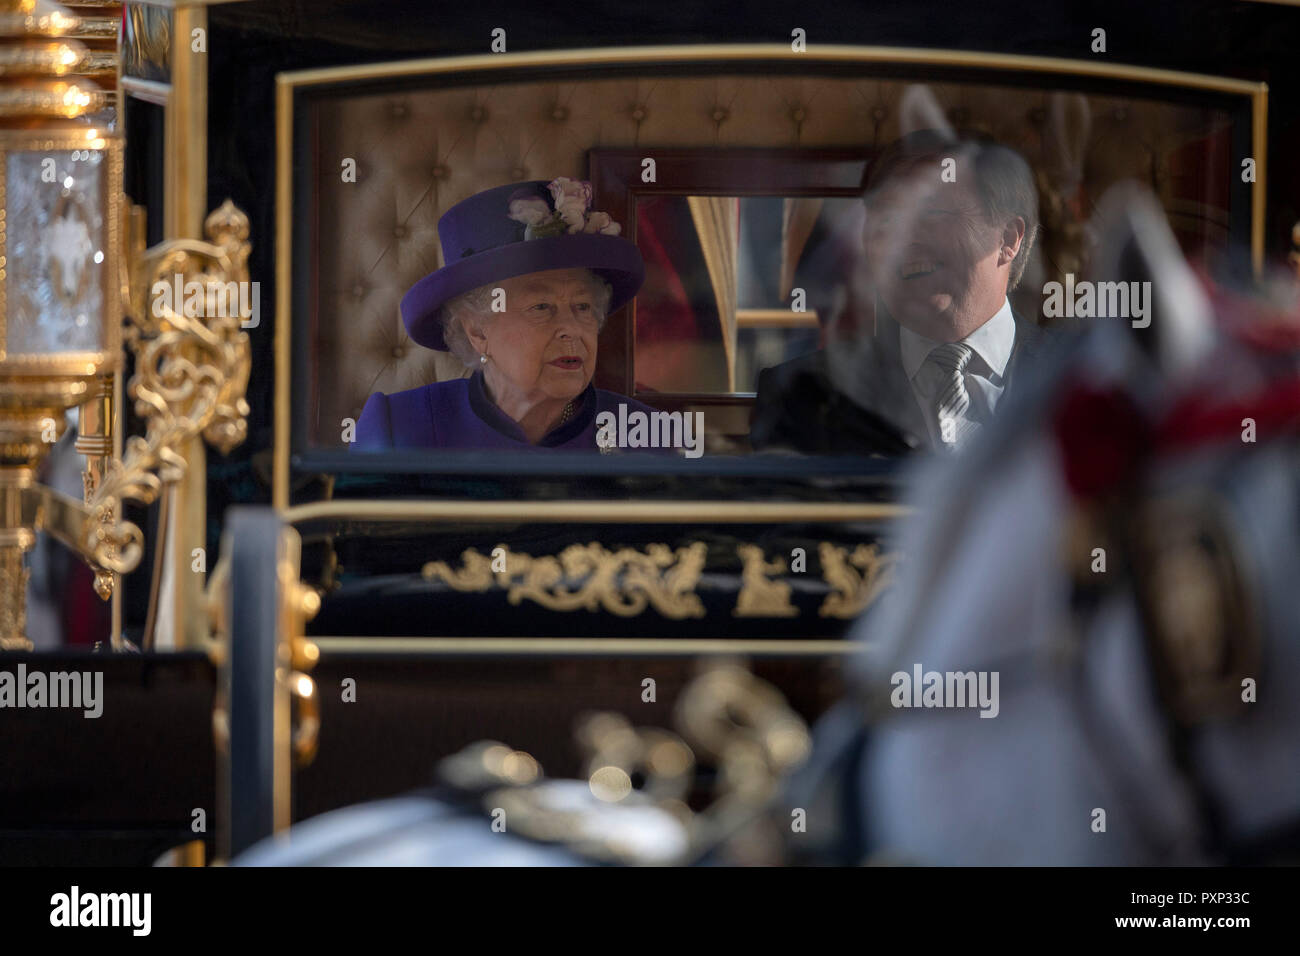 Queen Elizabeth II and King Willem-Alexander in the State Carriage as it arrives at Buckingham Palace, London, during the state visit of King Willem-Alexander and Queen Maxima of the Netherlands. Stock Photo